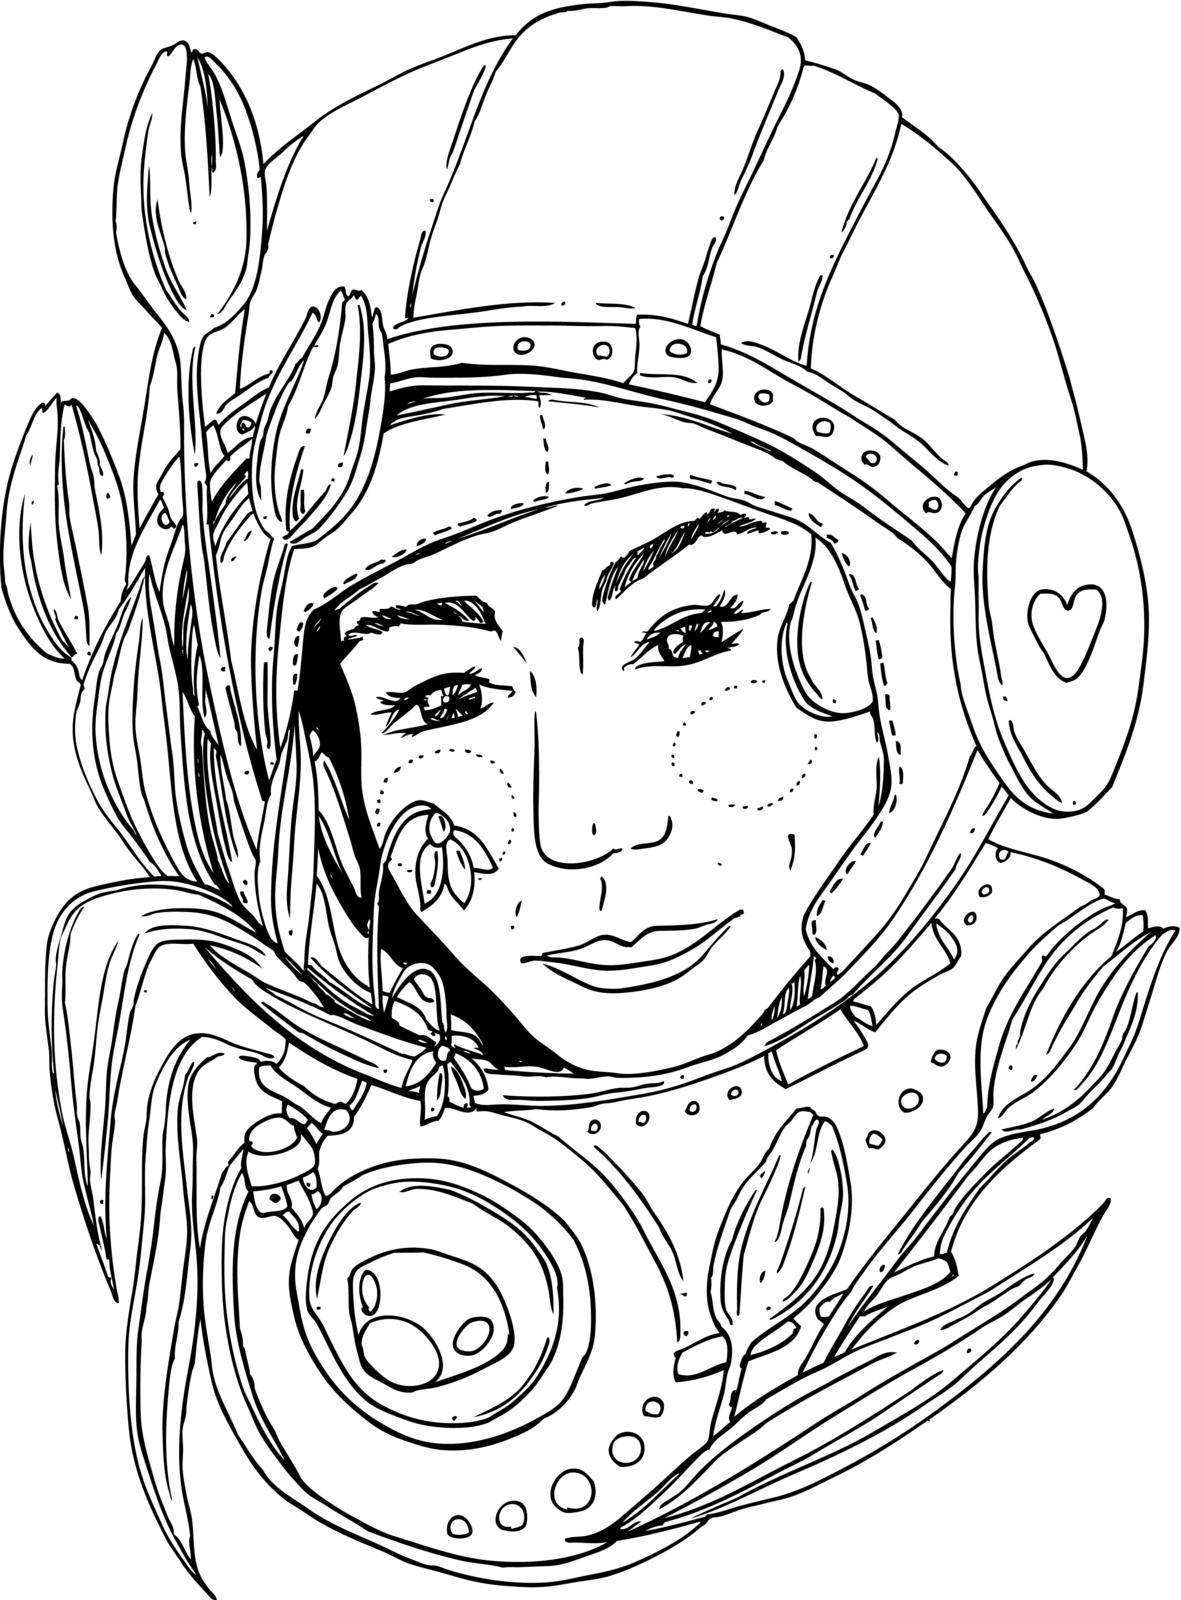 Hand drawn vector illustration woman space. Ptint for t-shirt.